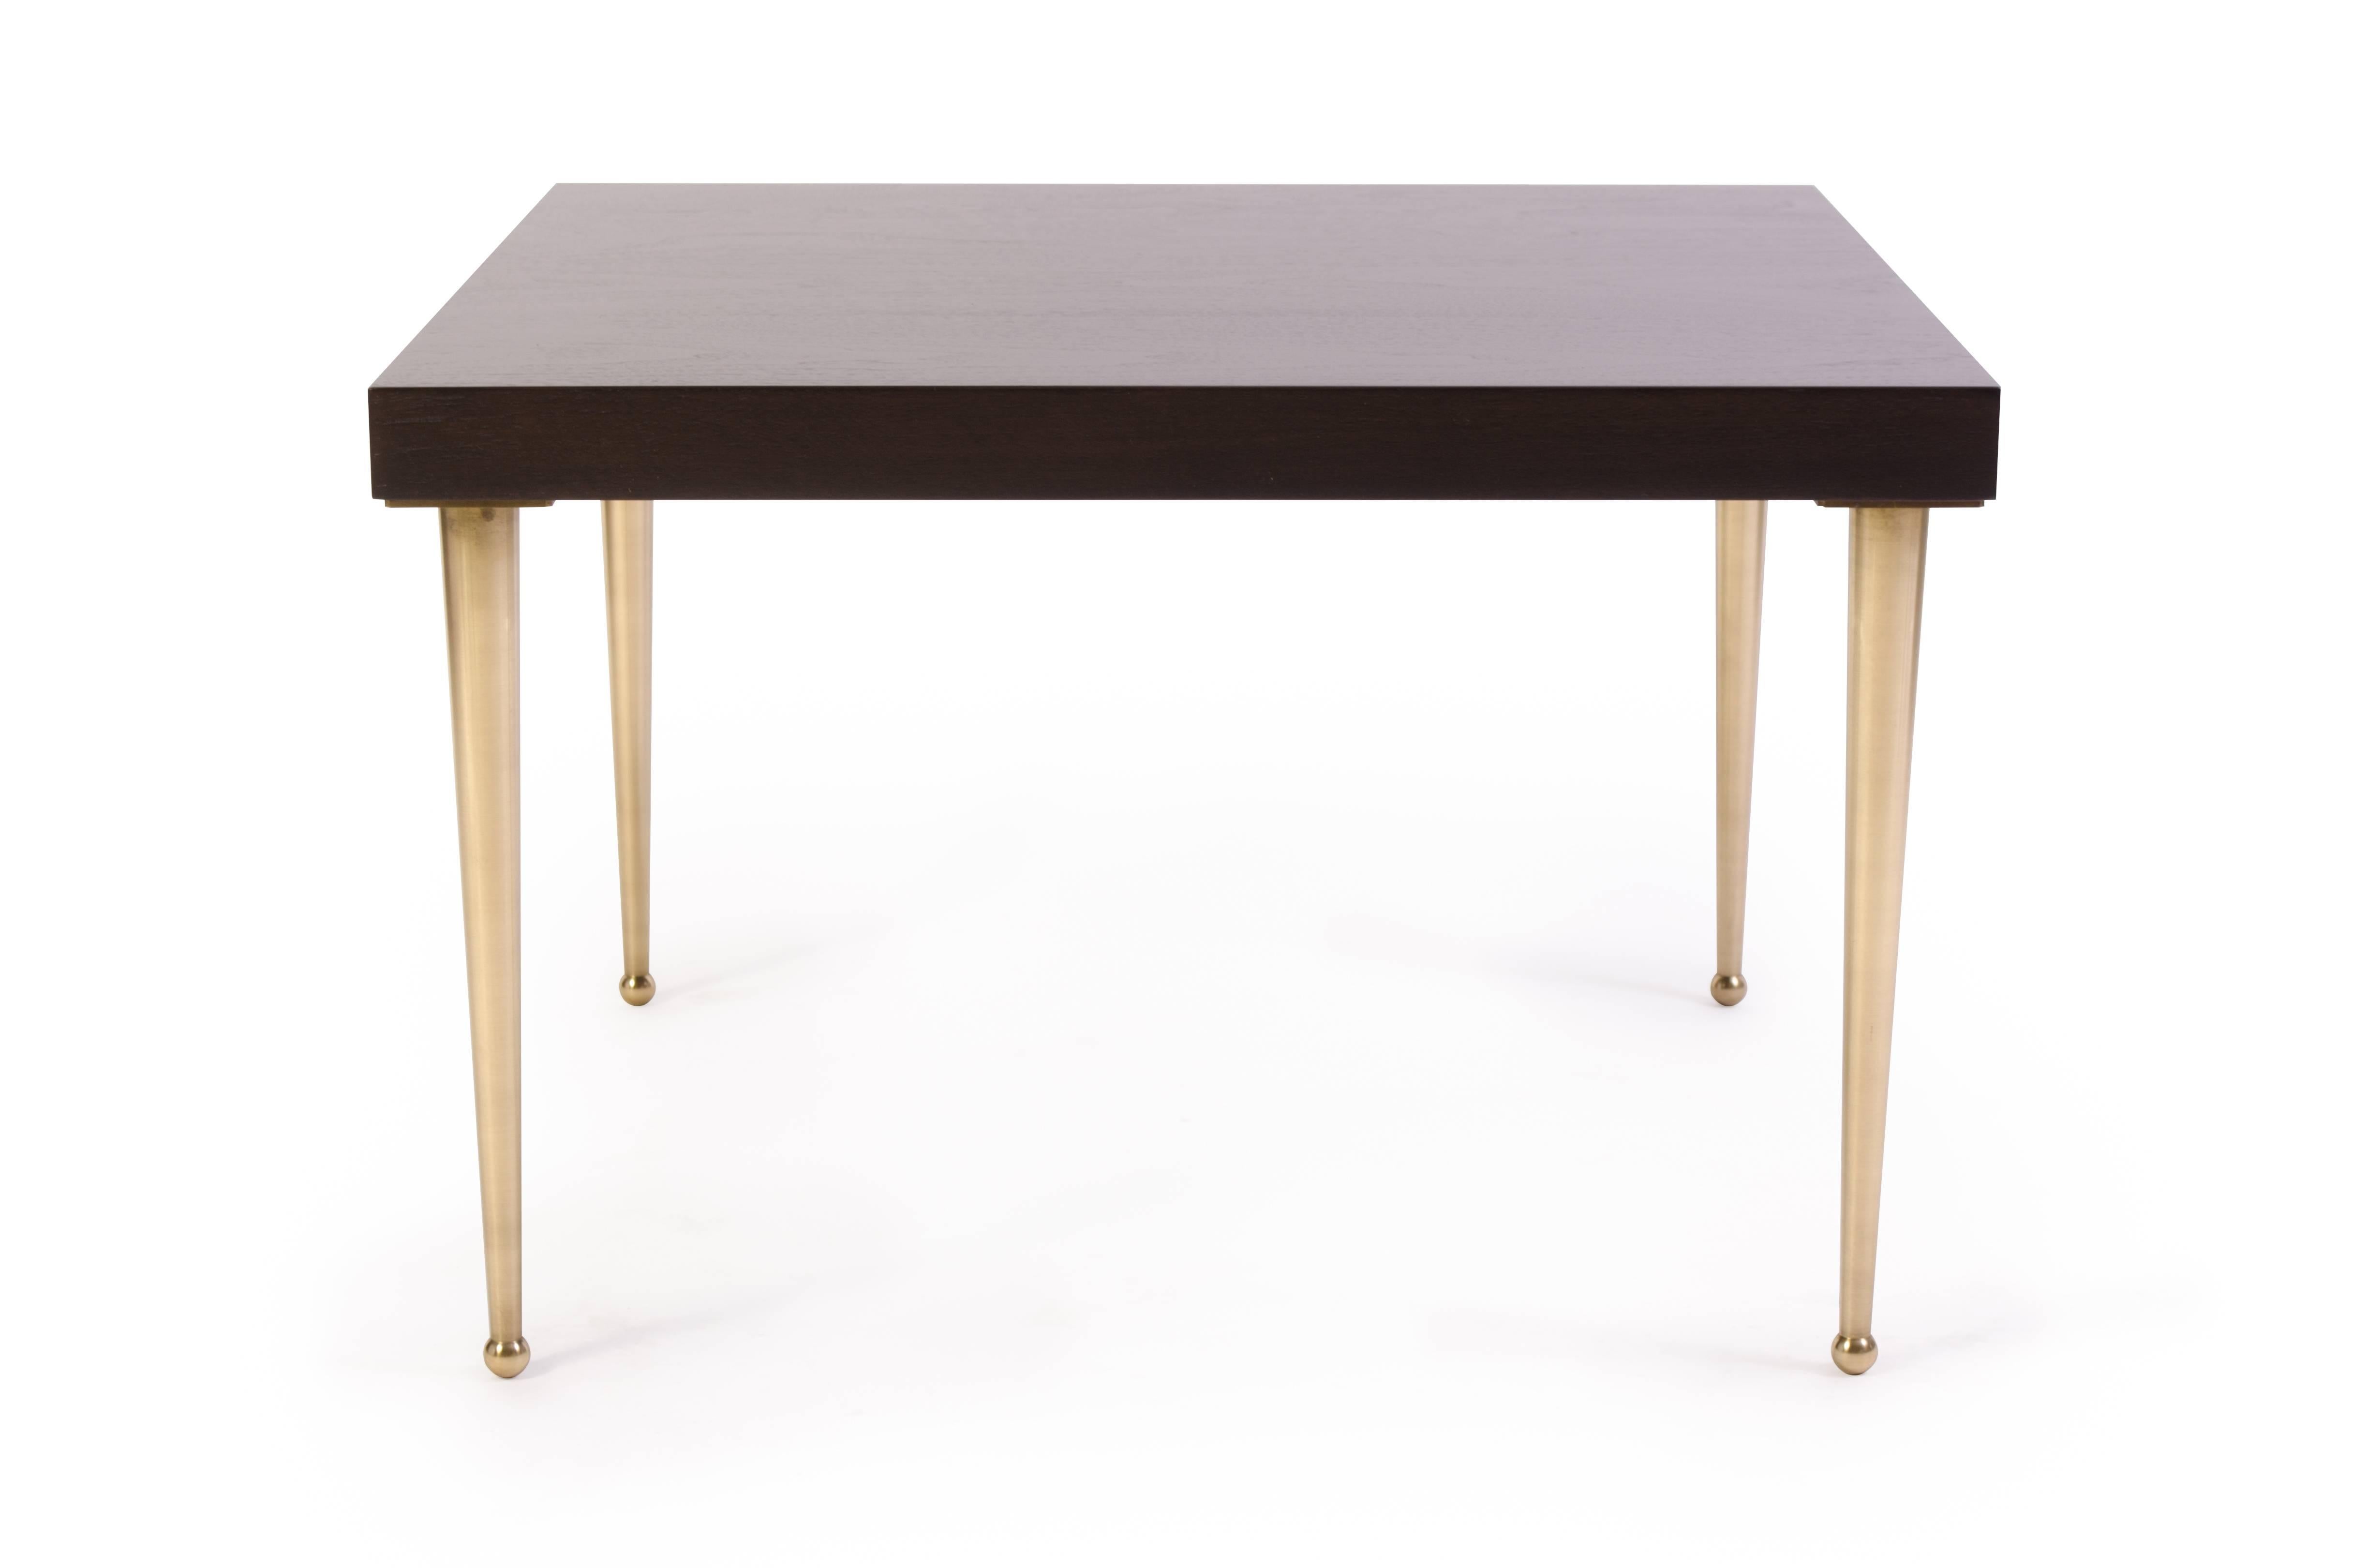 The Allister tables designed by Montage. A stunning pair of tables that can be used as side tables or a cocktail table, to be moved around as you wish. The highest quality materials were used to compose these handsome pieces of design. Solid pieces